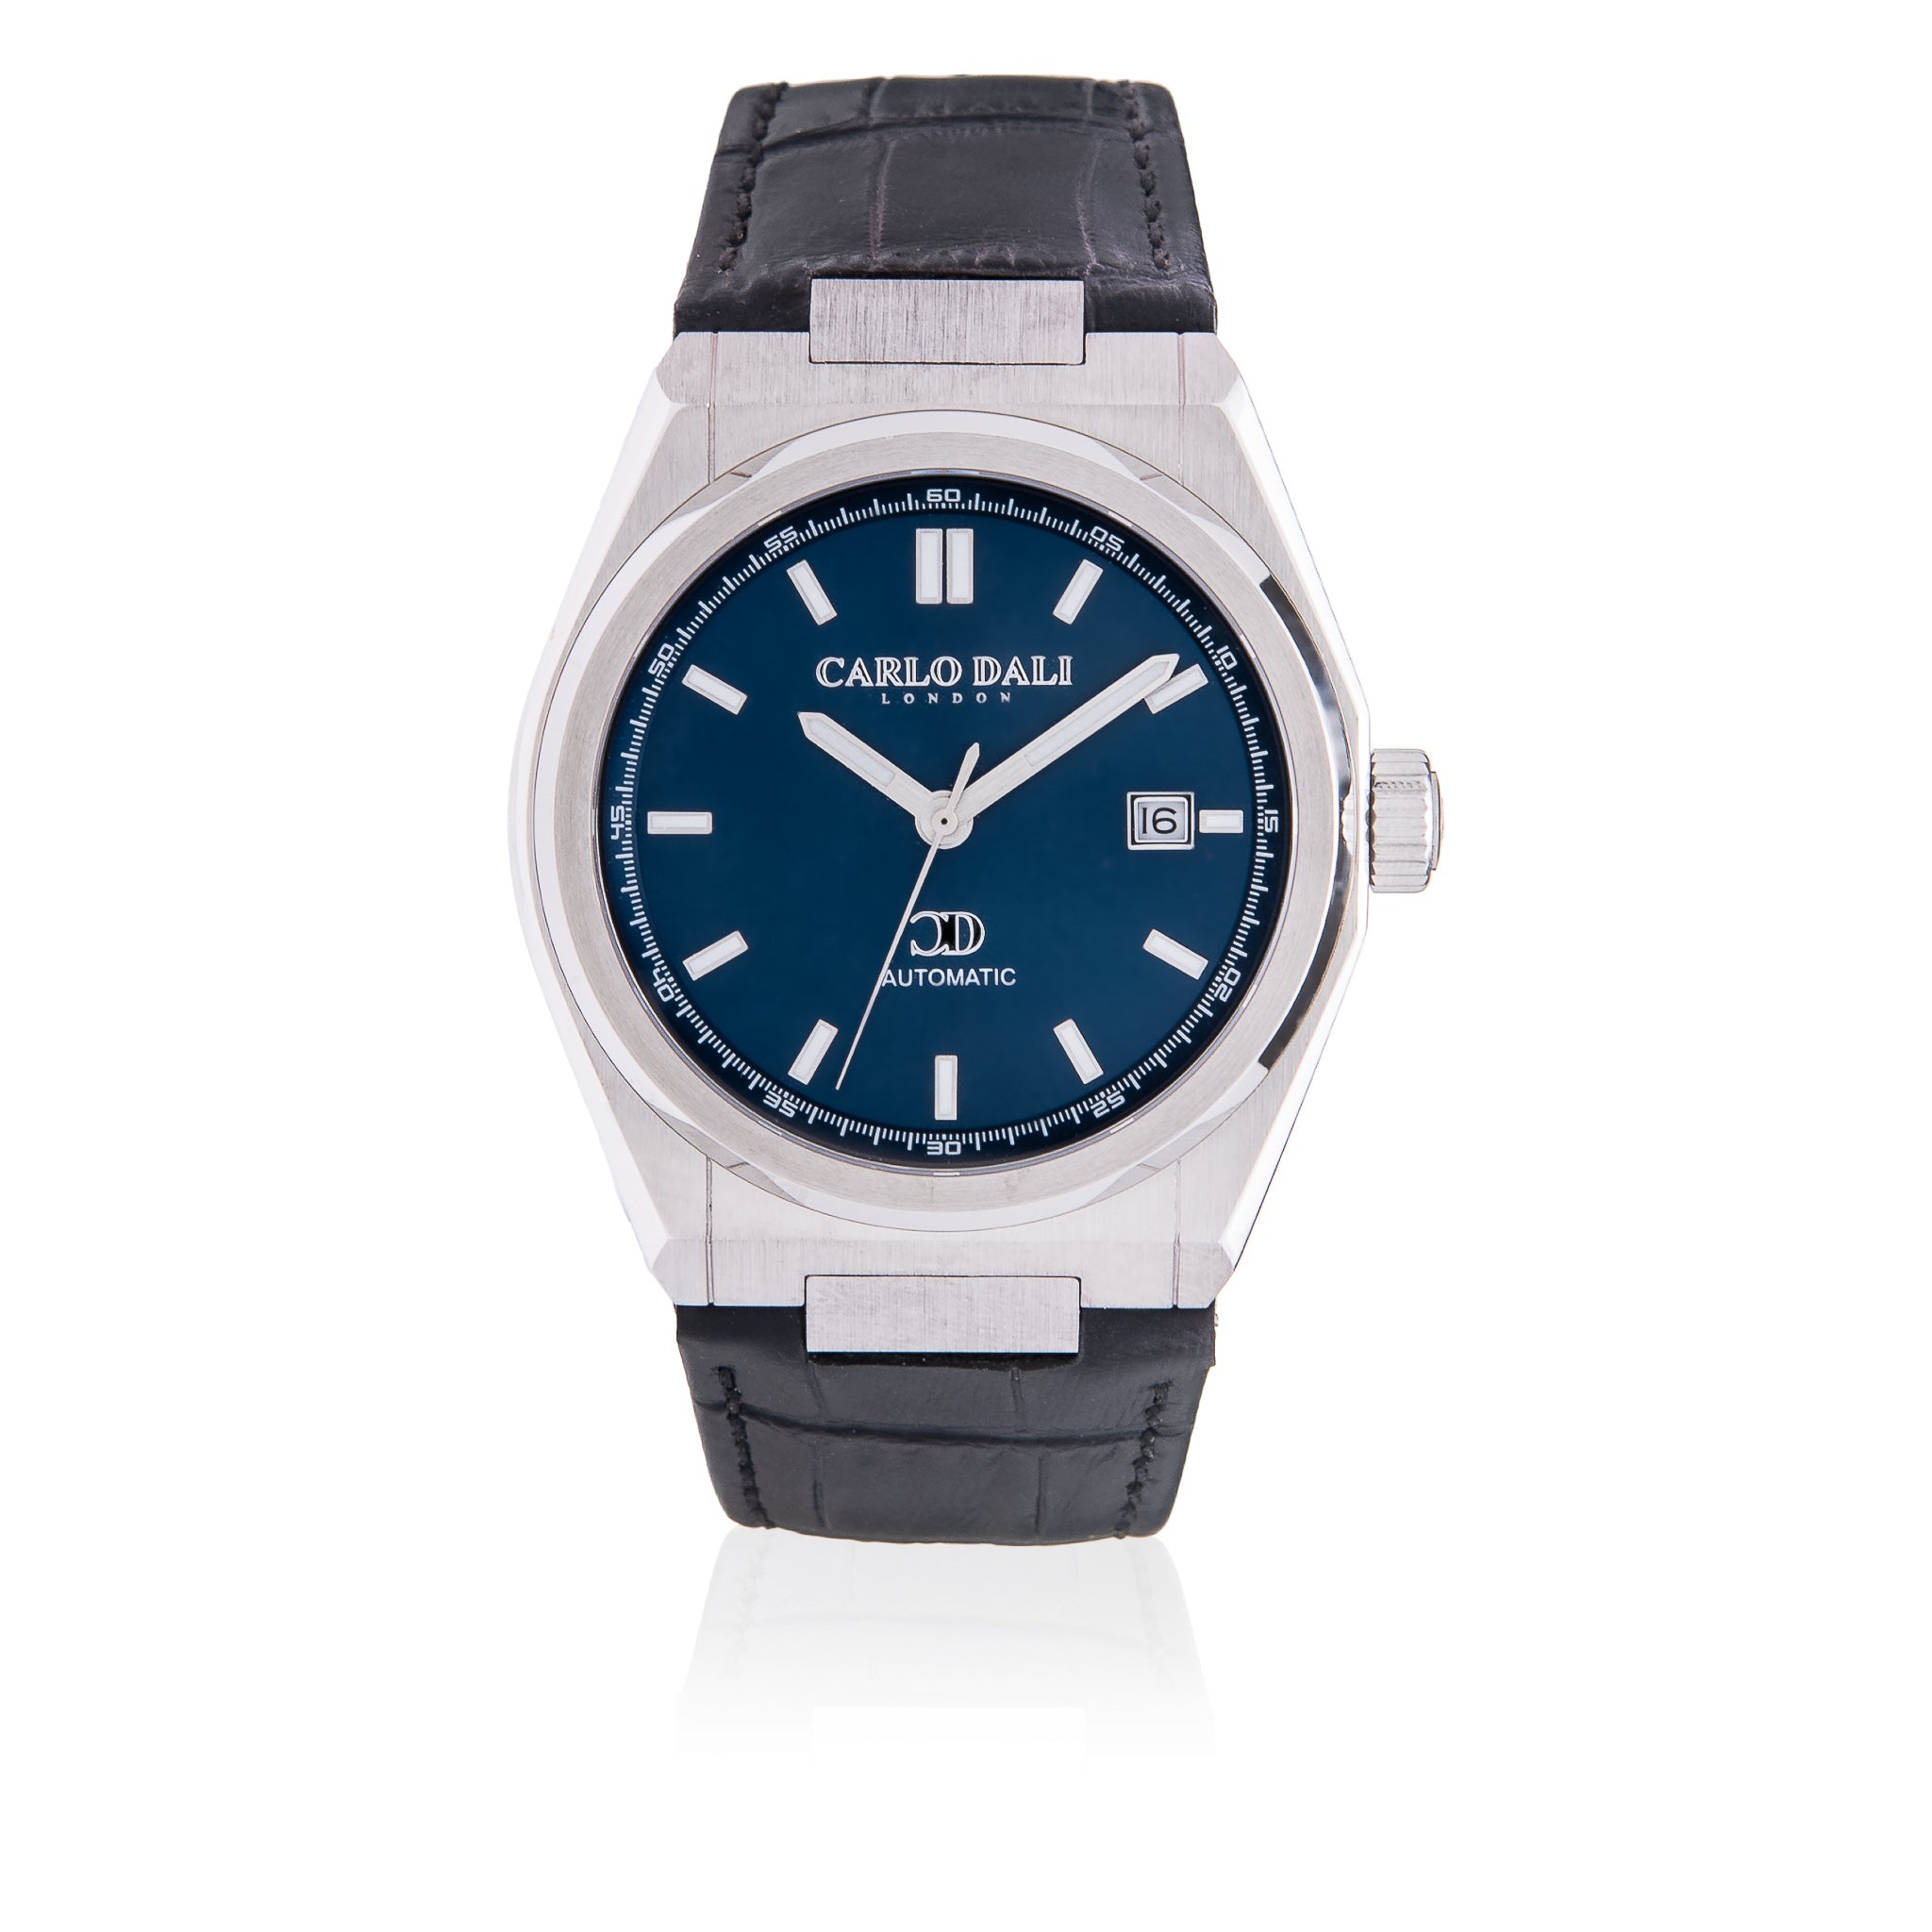 "1888 automatic" BLACK, SILVER & BLUE LEATHER WATCH